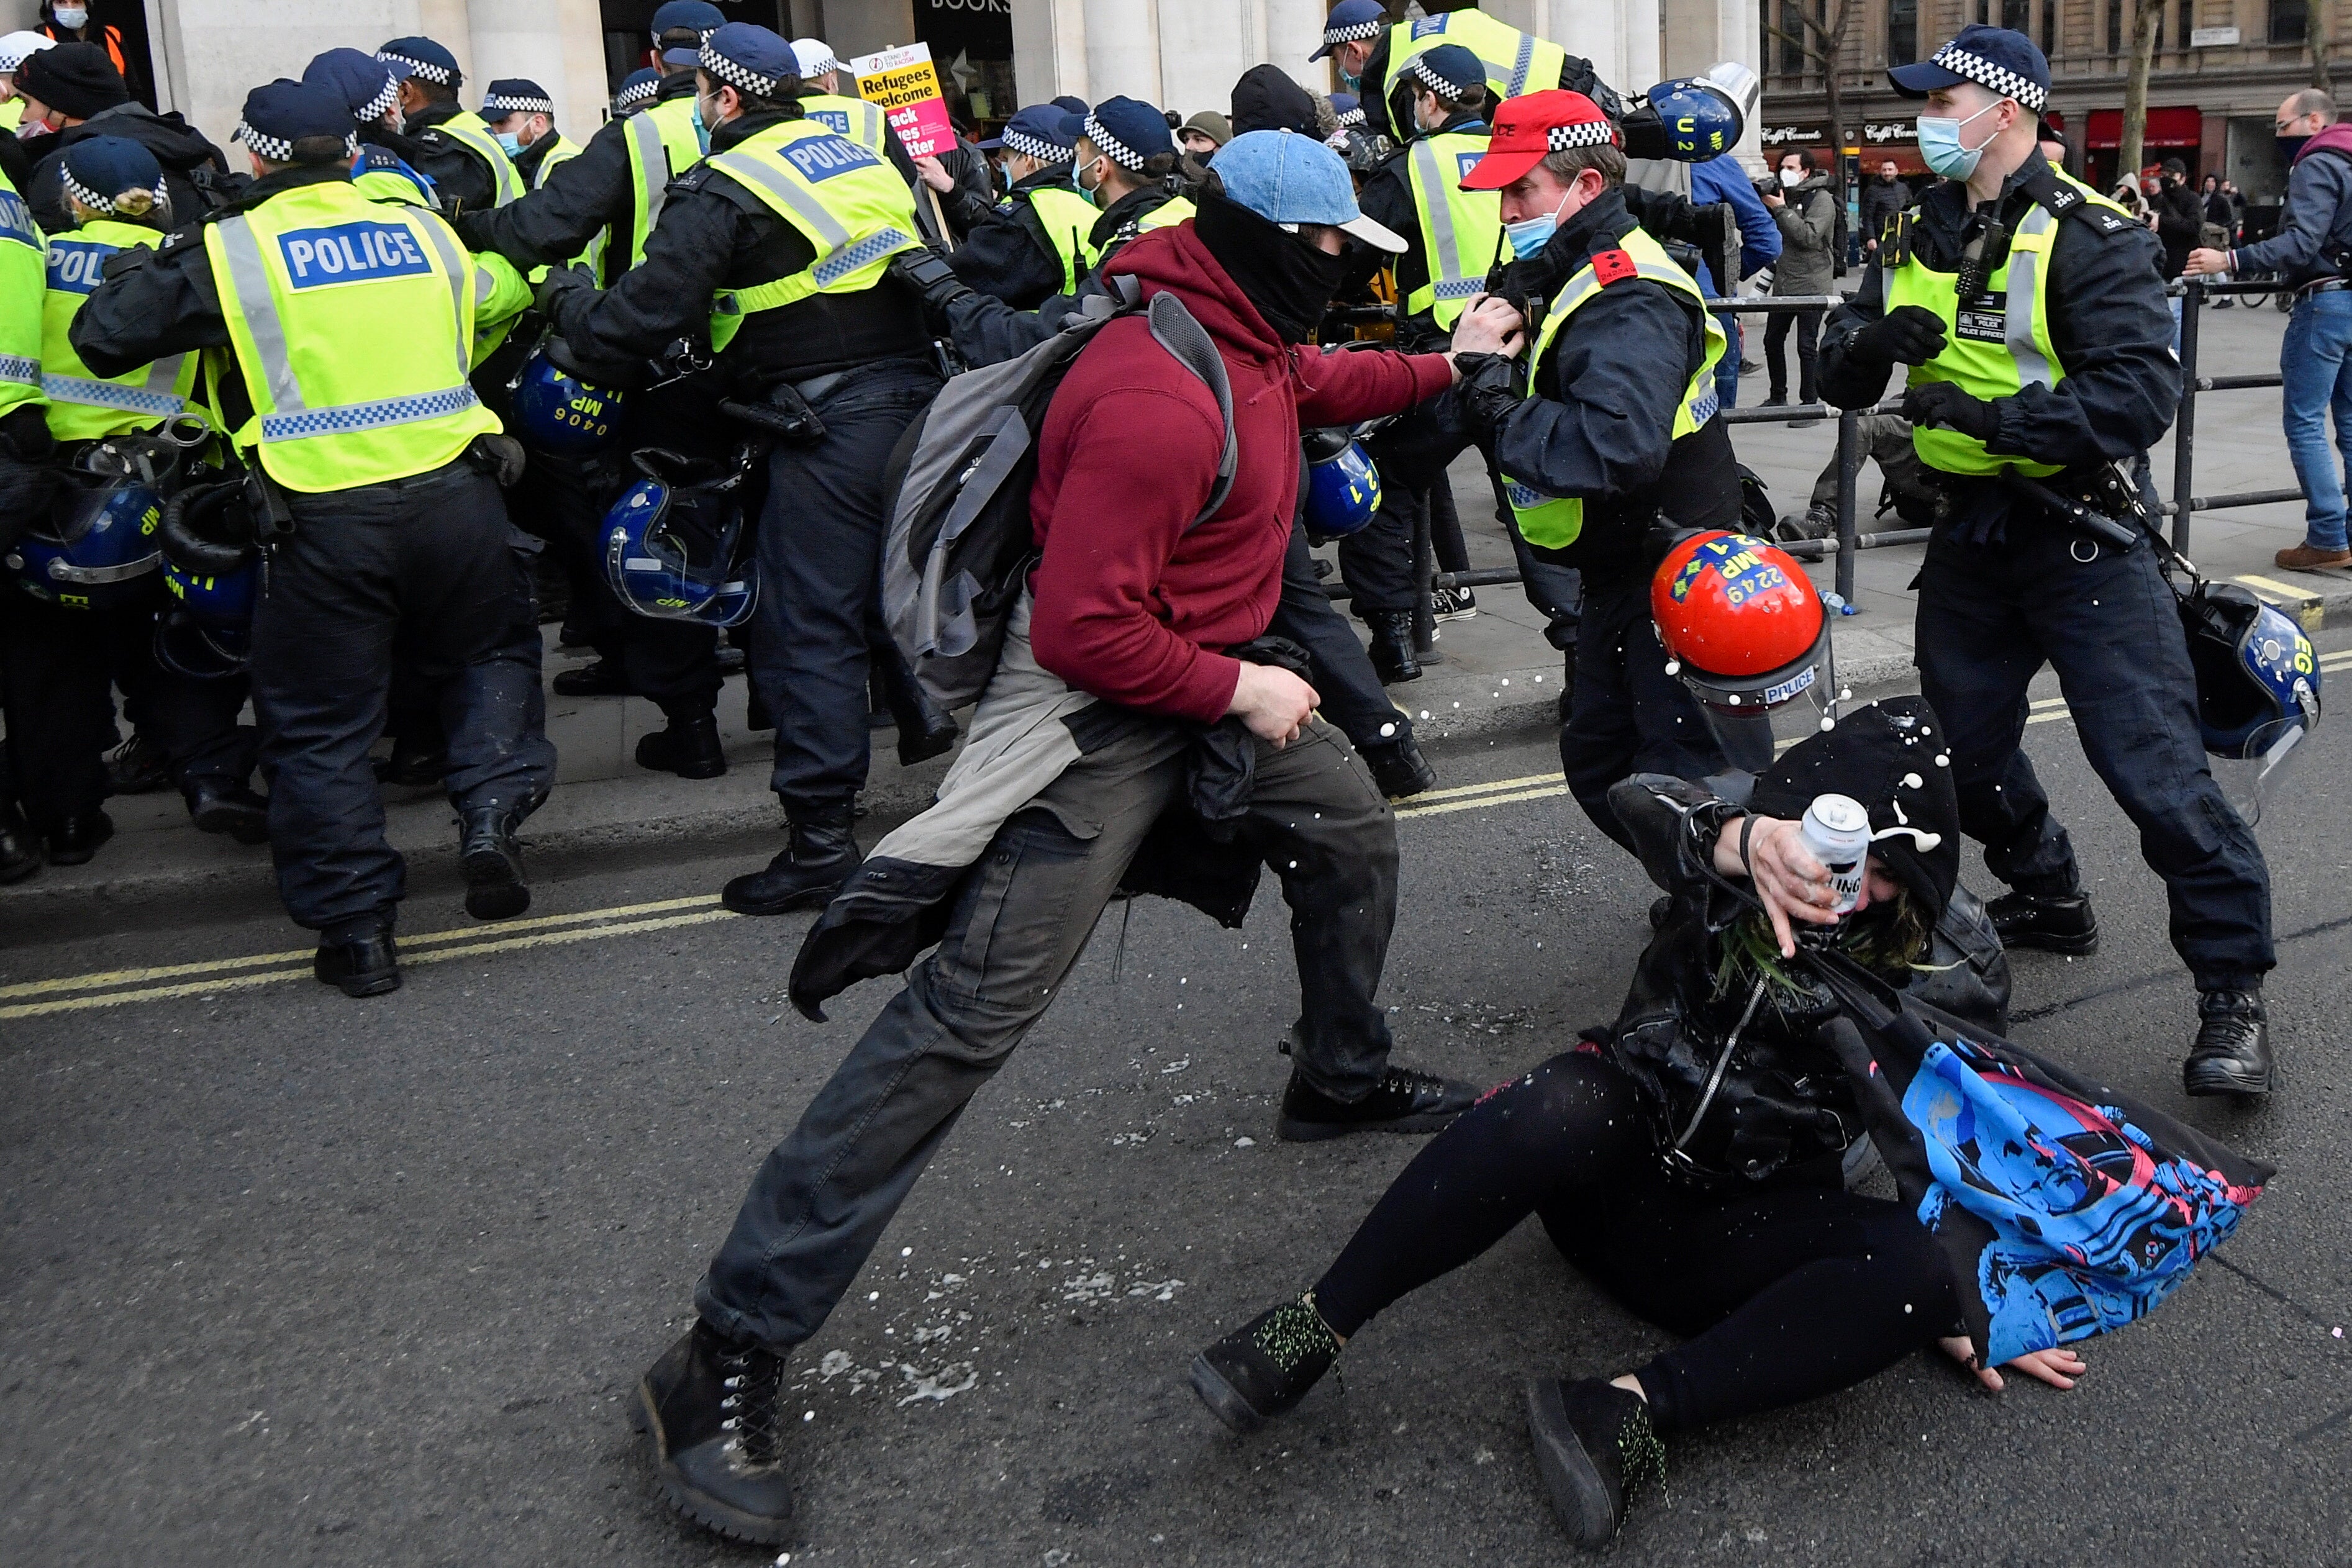 Scuffles between protesters and police in London on Saturday